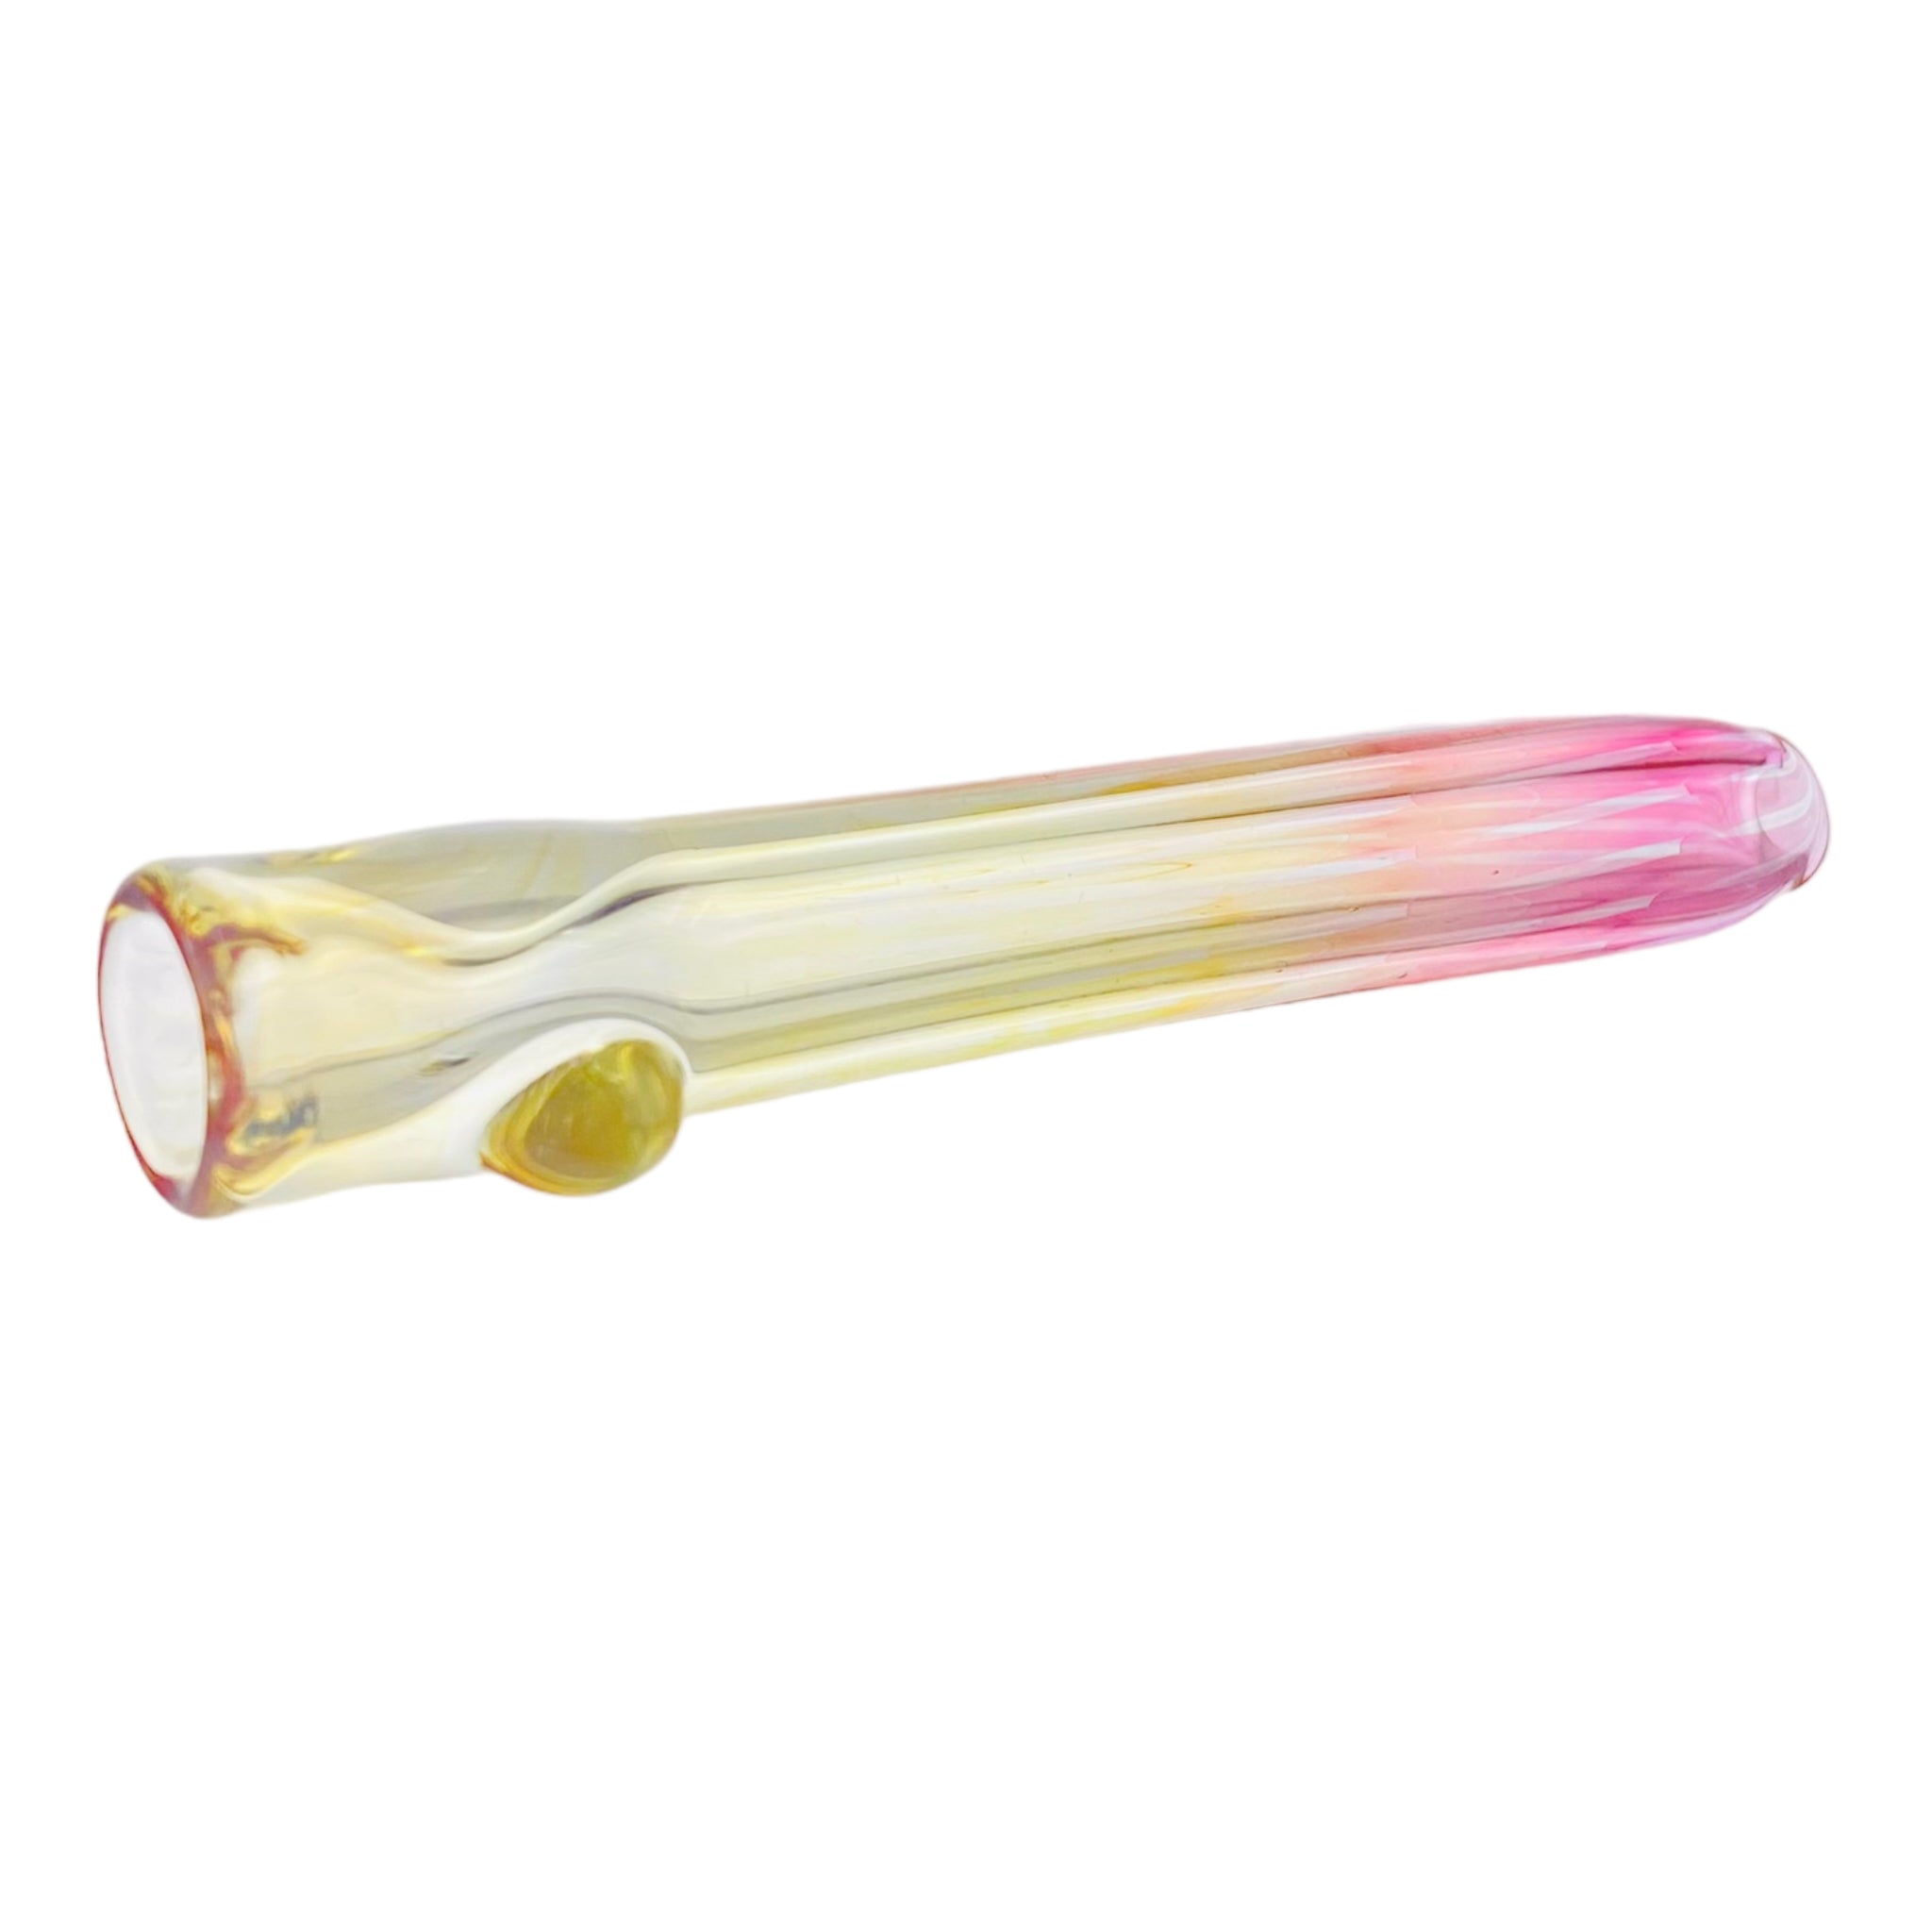 Glass Chillum Pipe - Yellow Silver Fuming To Pink Gold Fuming Fade